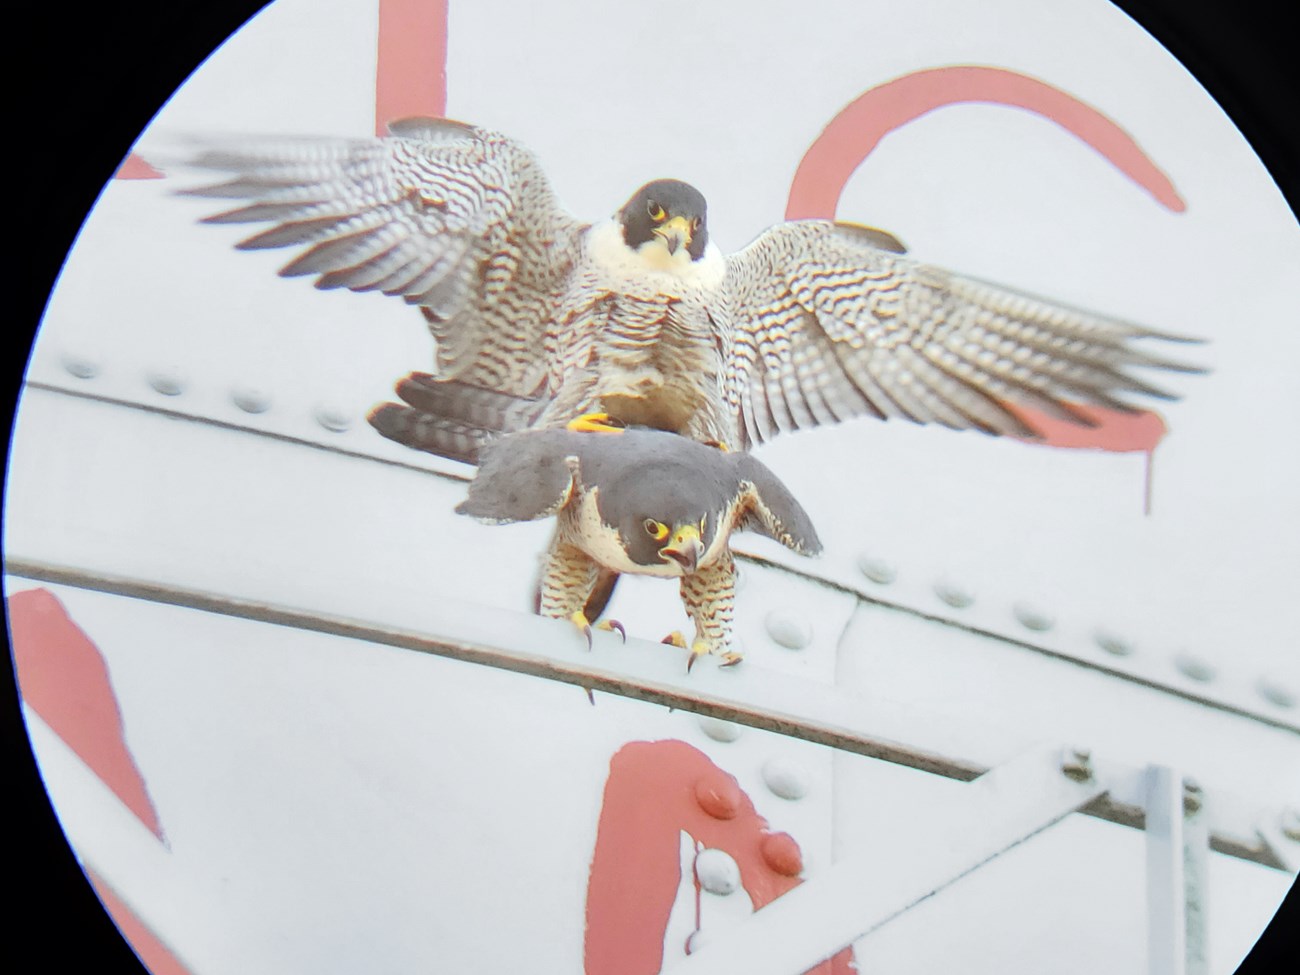 View through a scope of peregrine falcons mating on the Alcatraz Water Tower